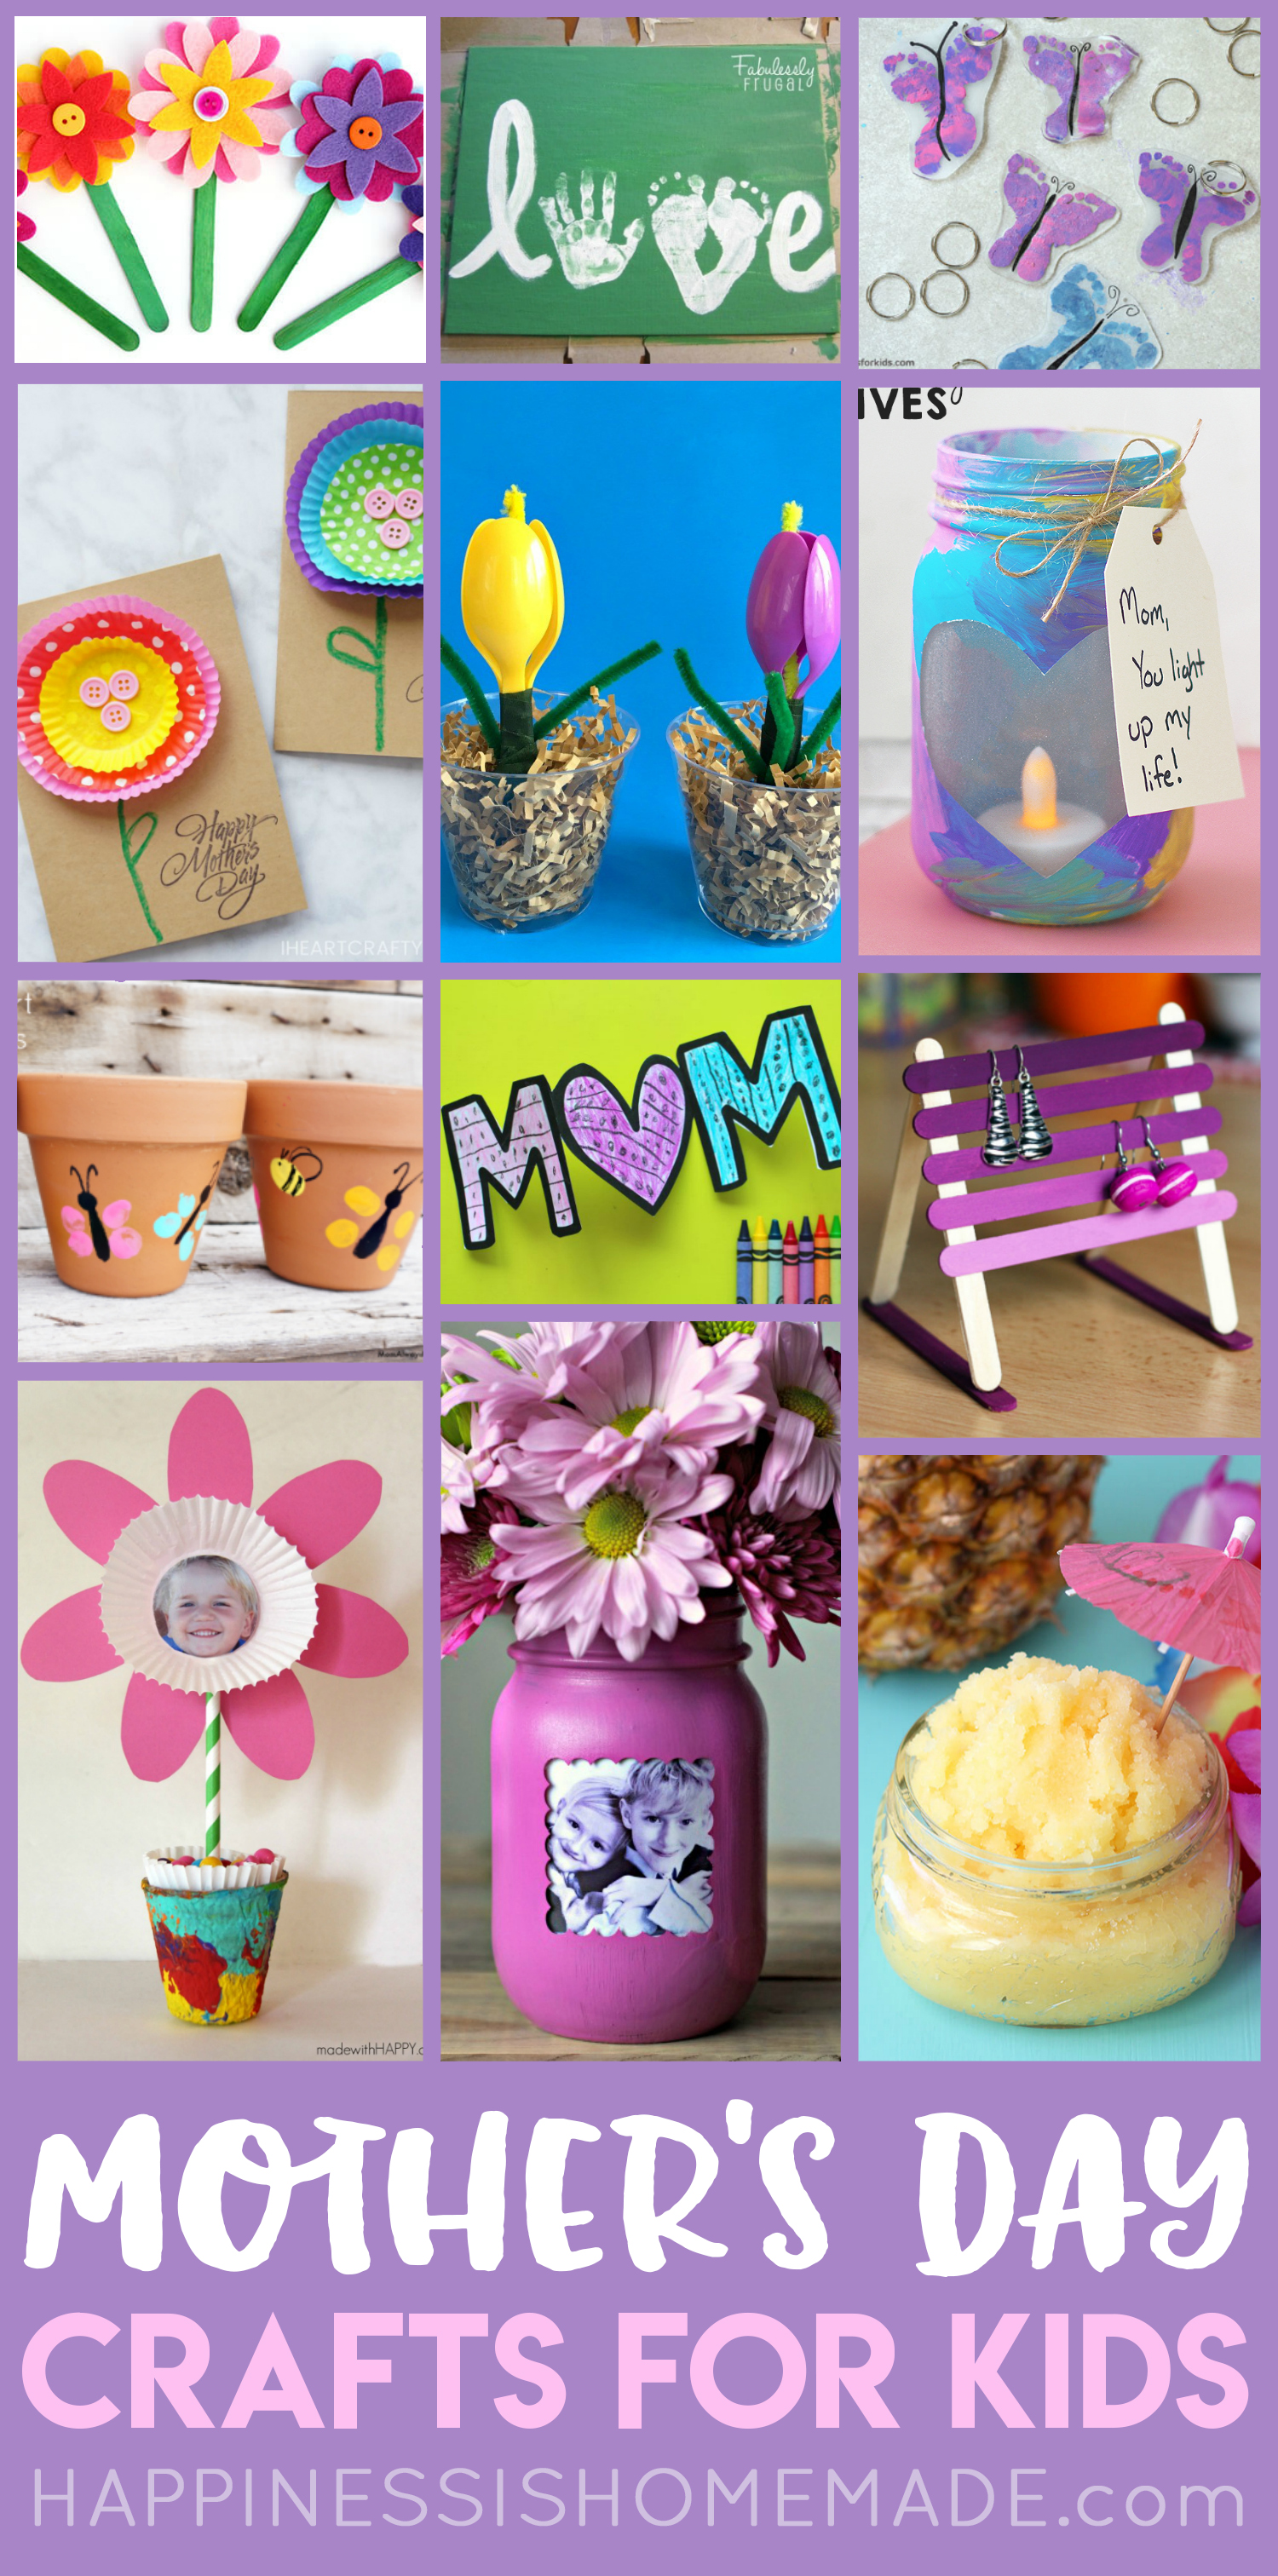 DIY MOTHERS DAY GIFT IDEAS - YouTube